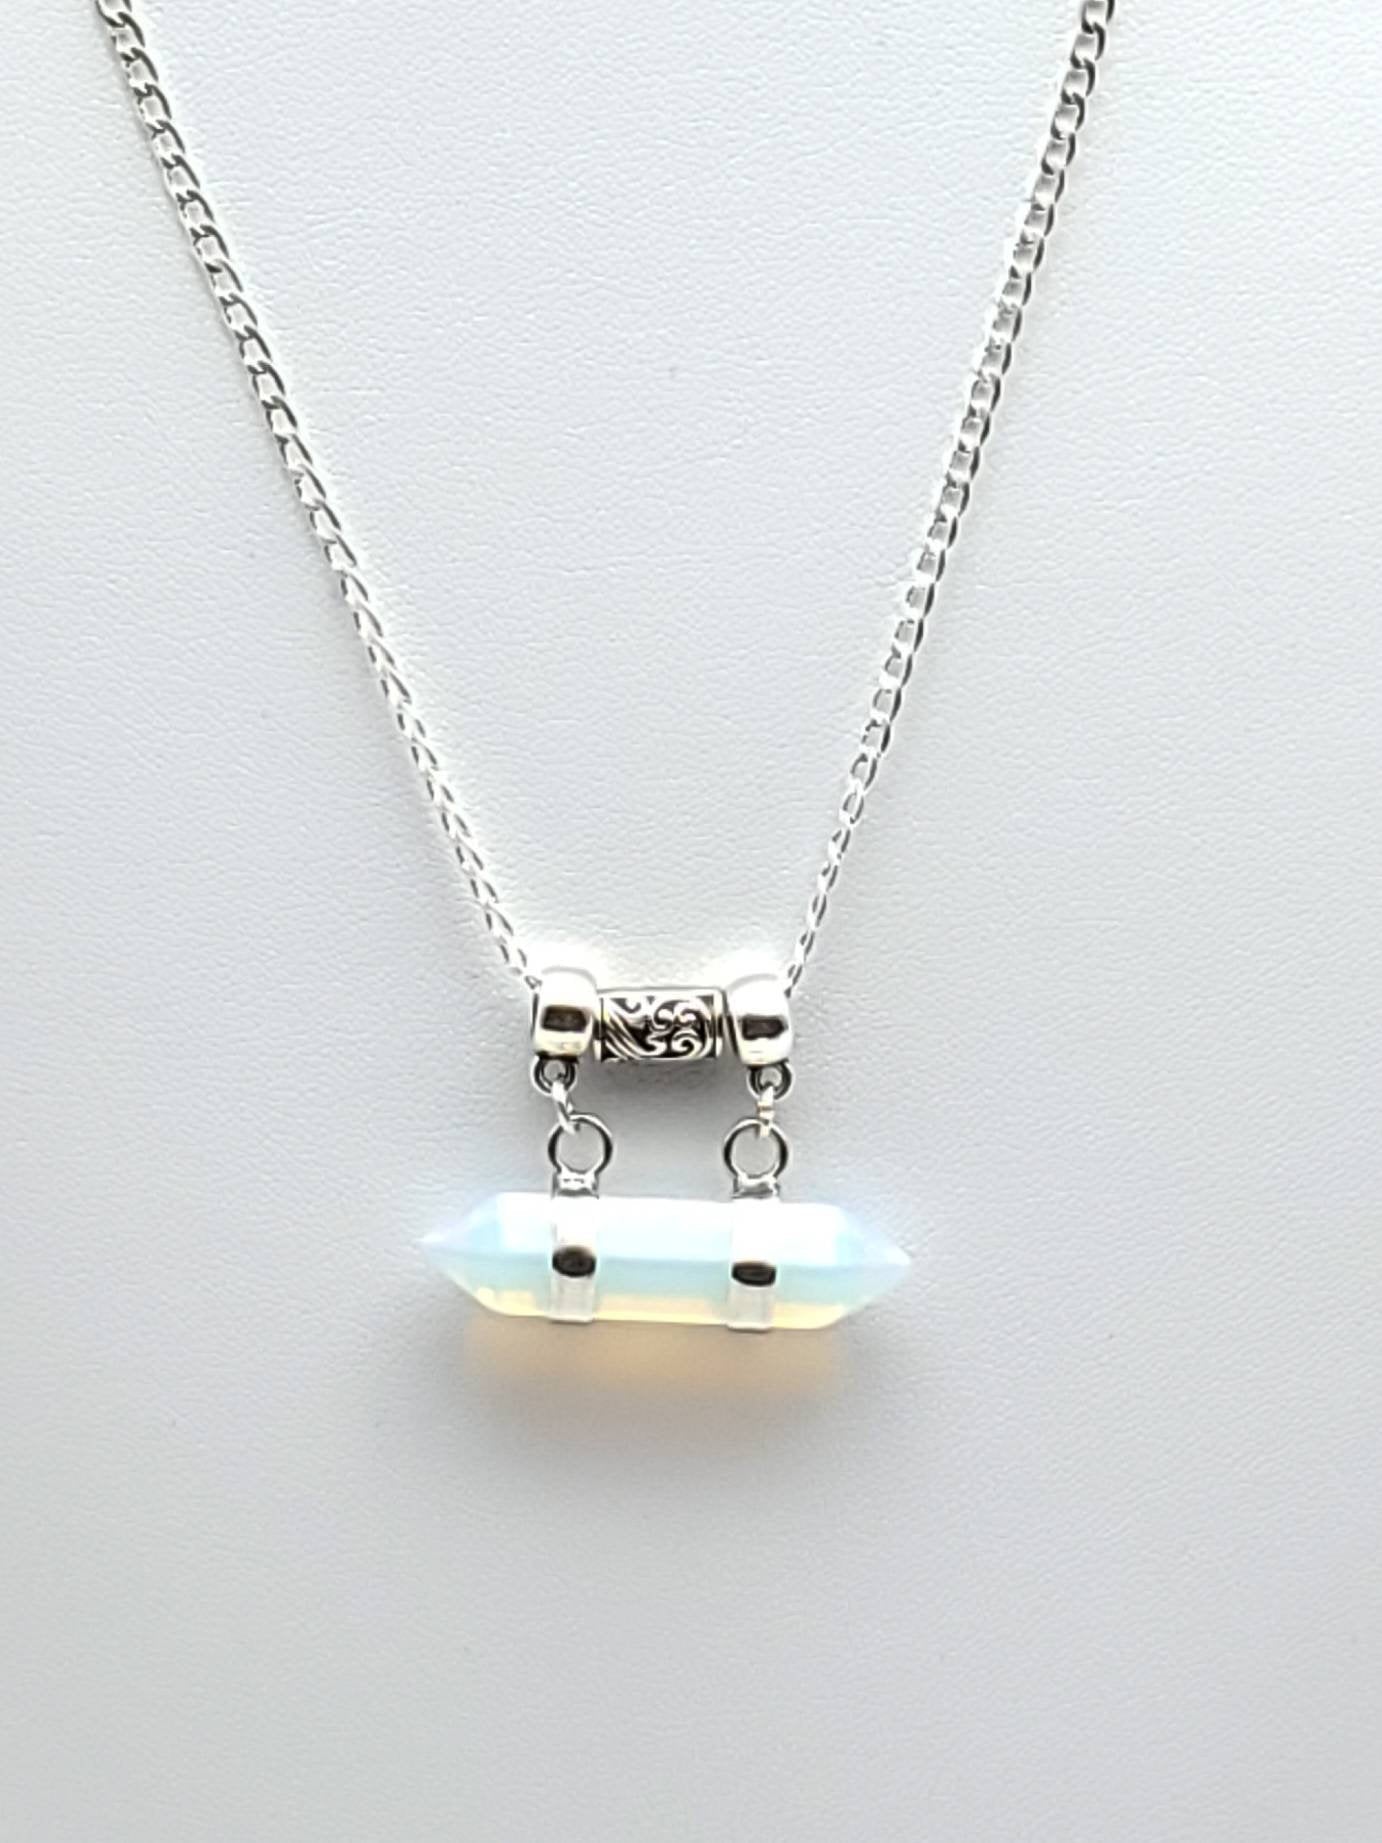 Opalite Pendant Necklace - The Caffeinated Raven